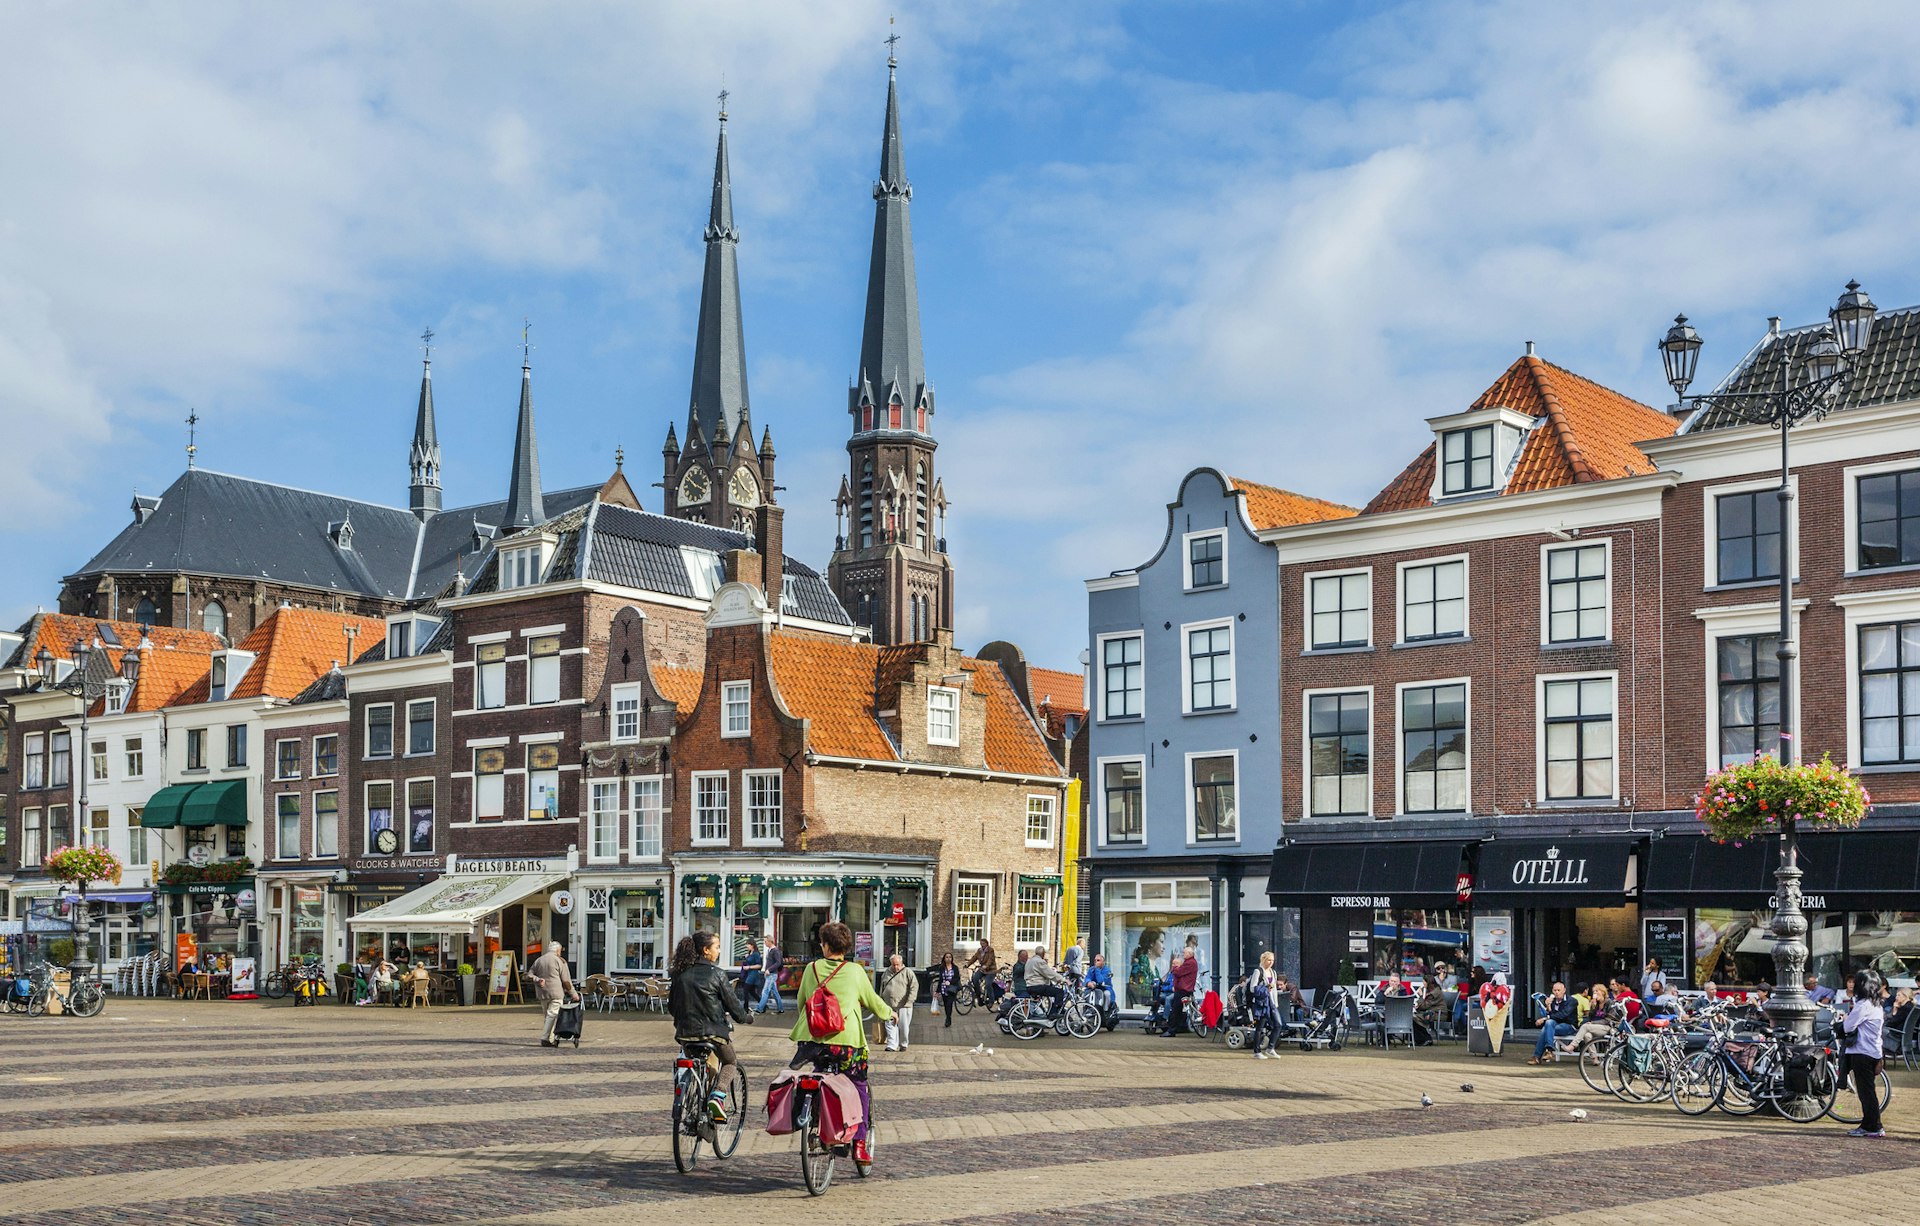 Delft market square with the spires of Maria van Jesse Church in the background 